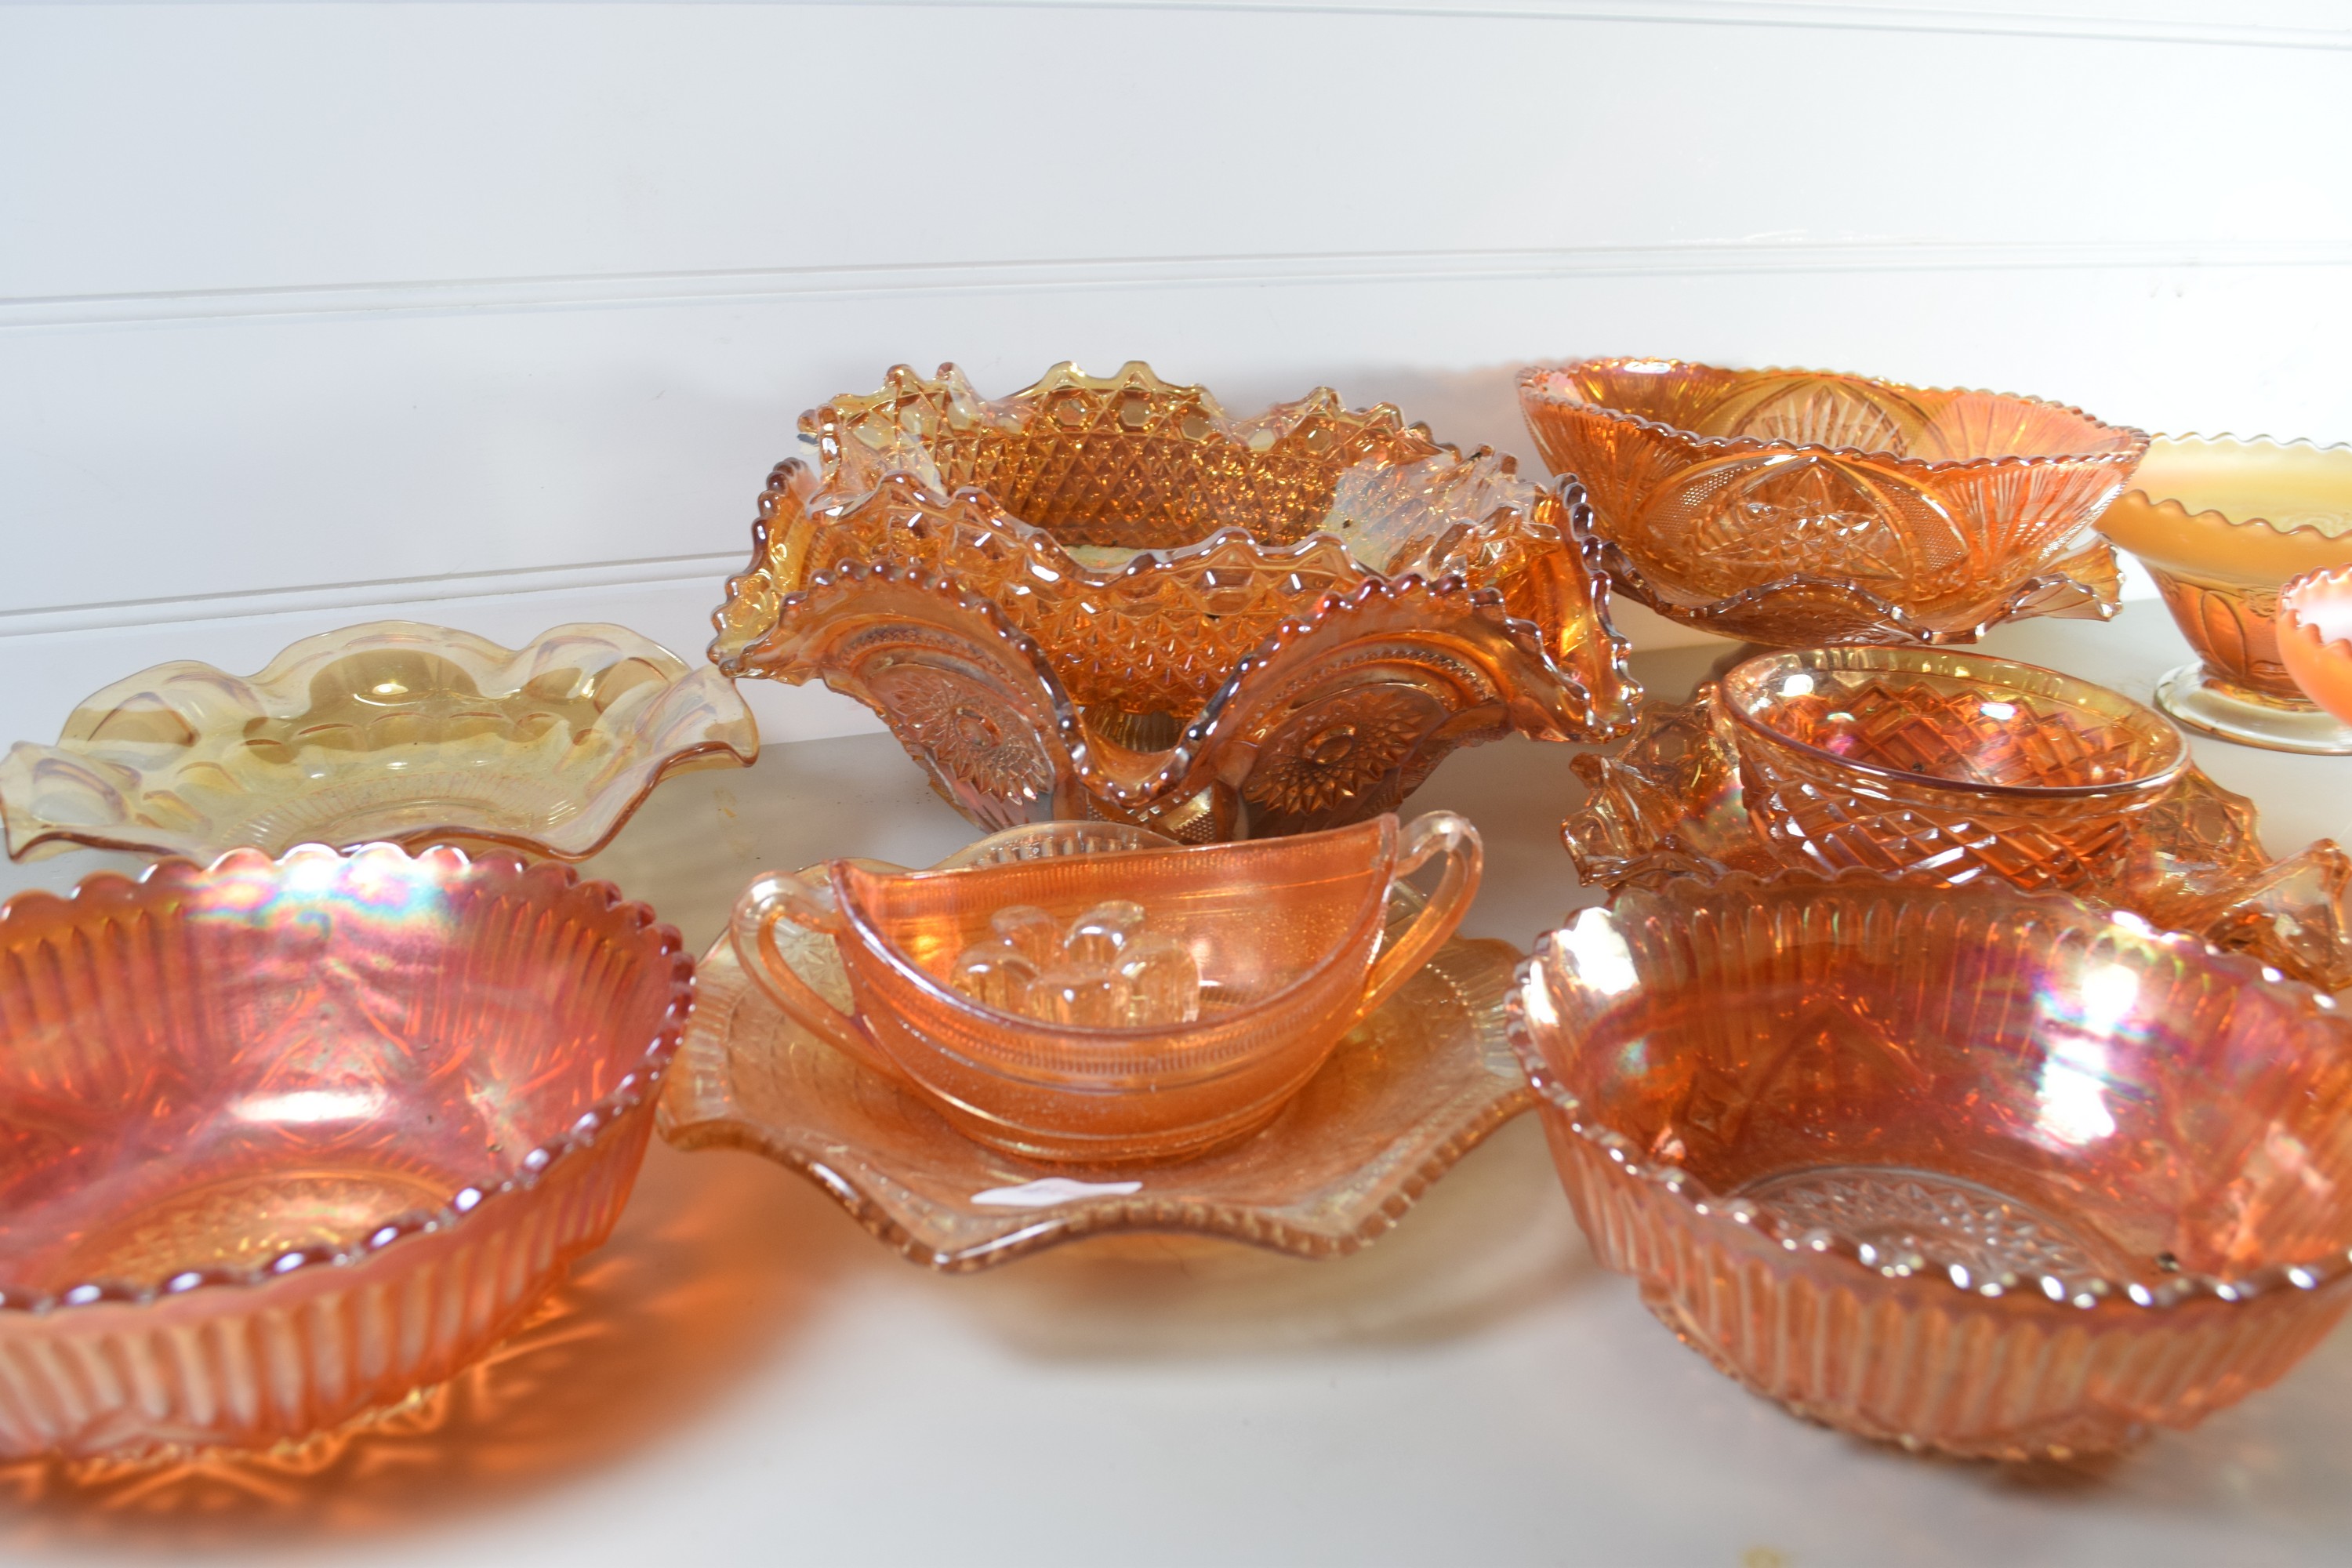 BOX CONTAINING CARNIVAL GLASS, TANGERINE COLOURED WITH FLORAL DESIGNS - Image 2 of 3